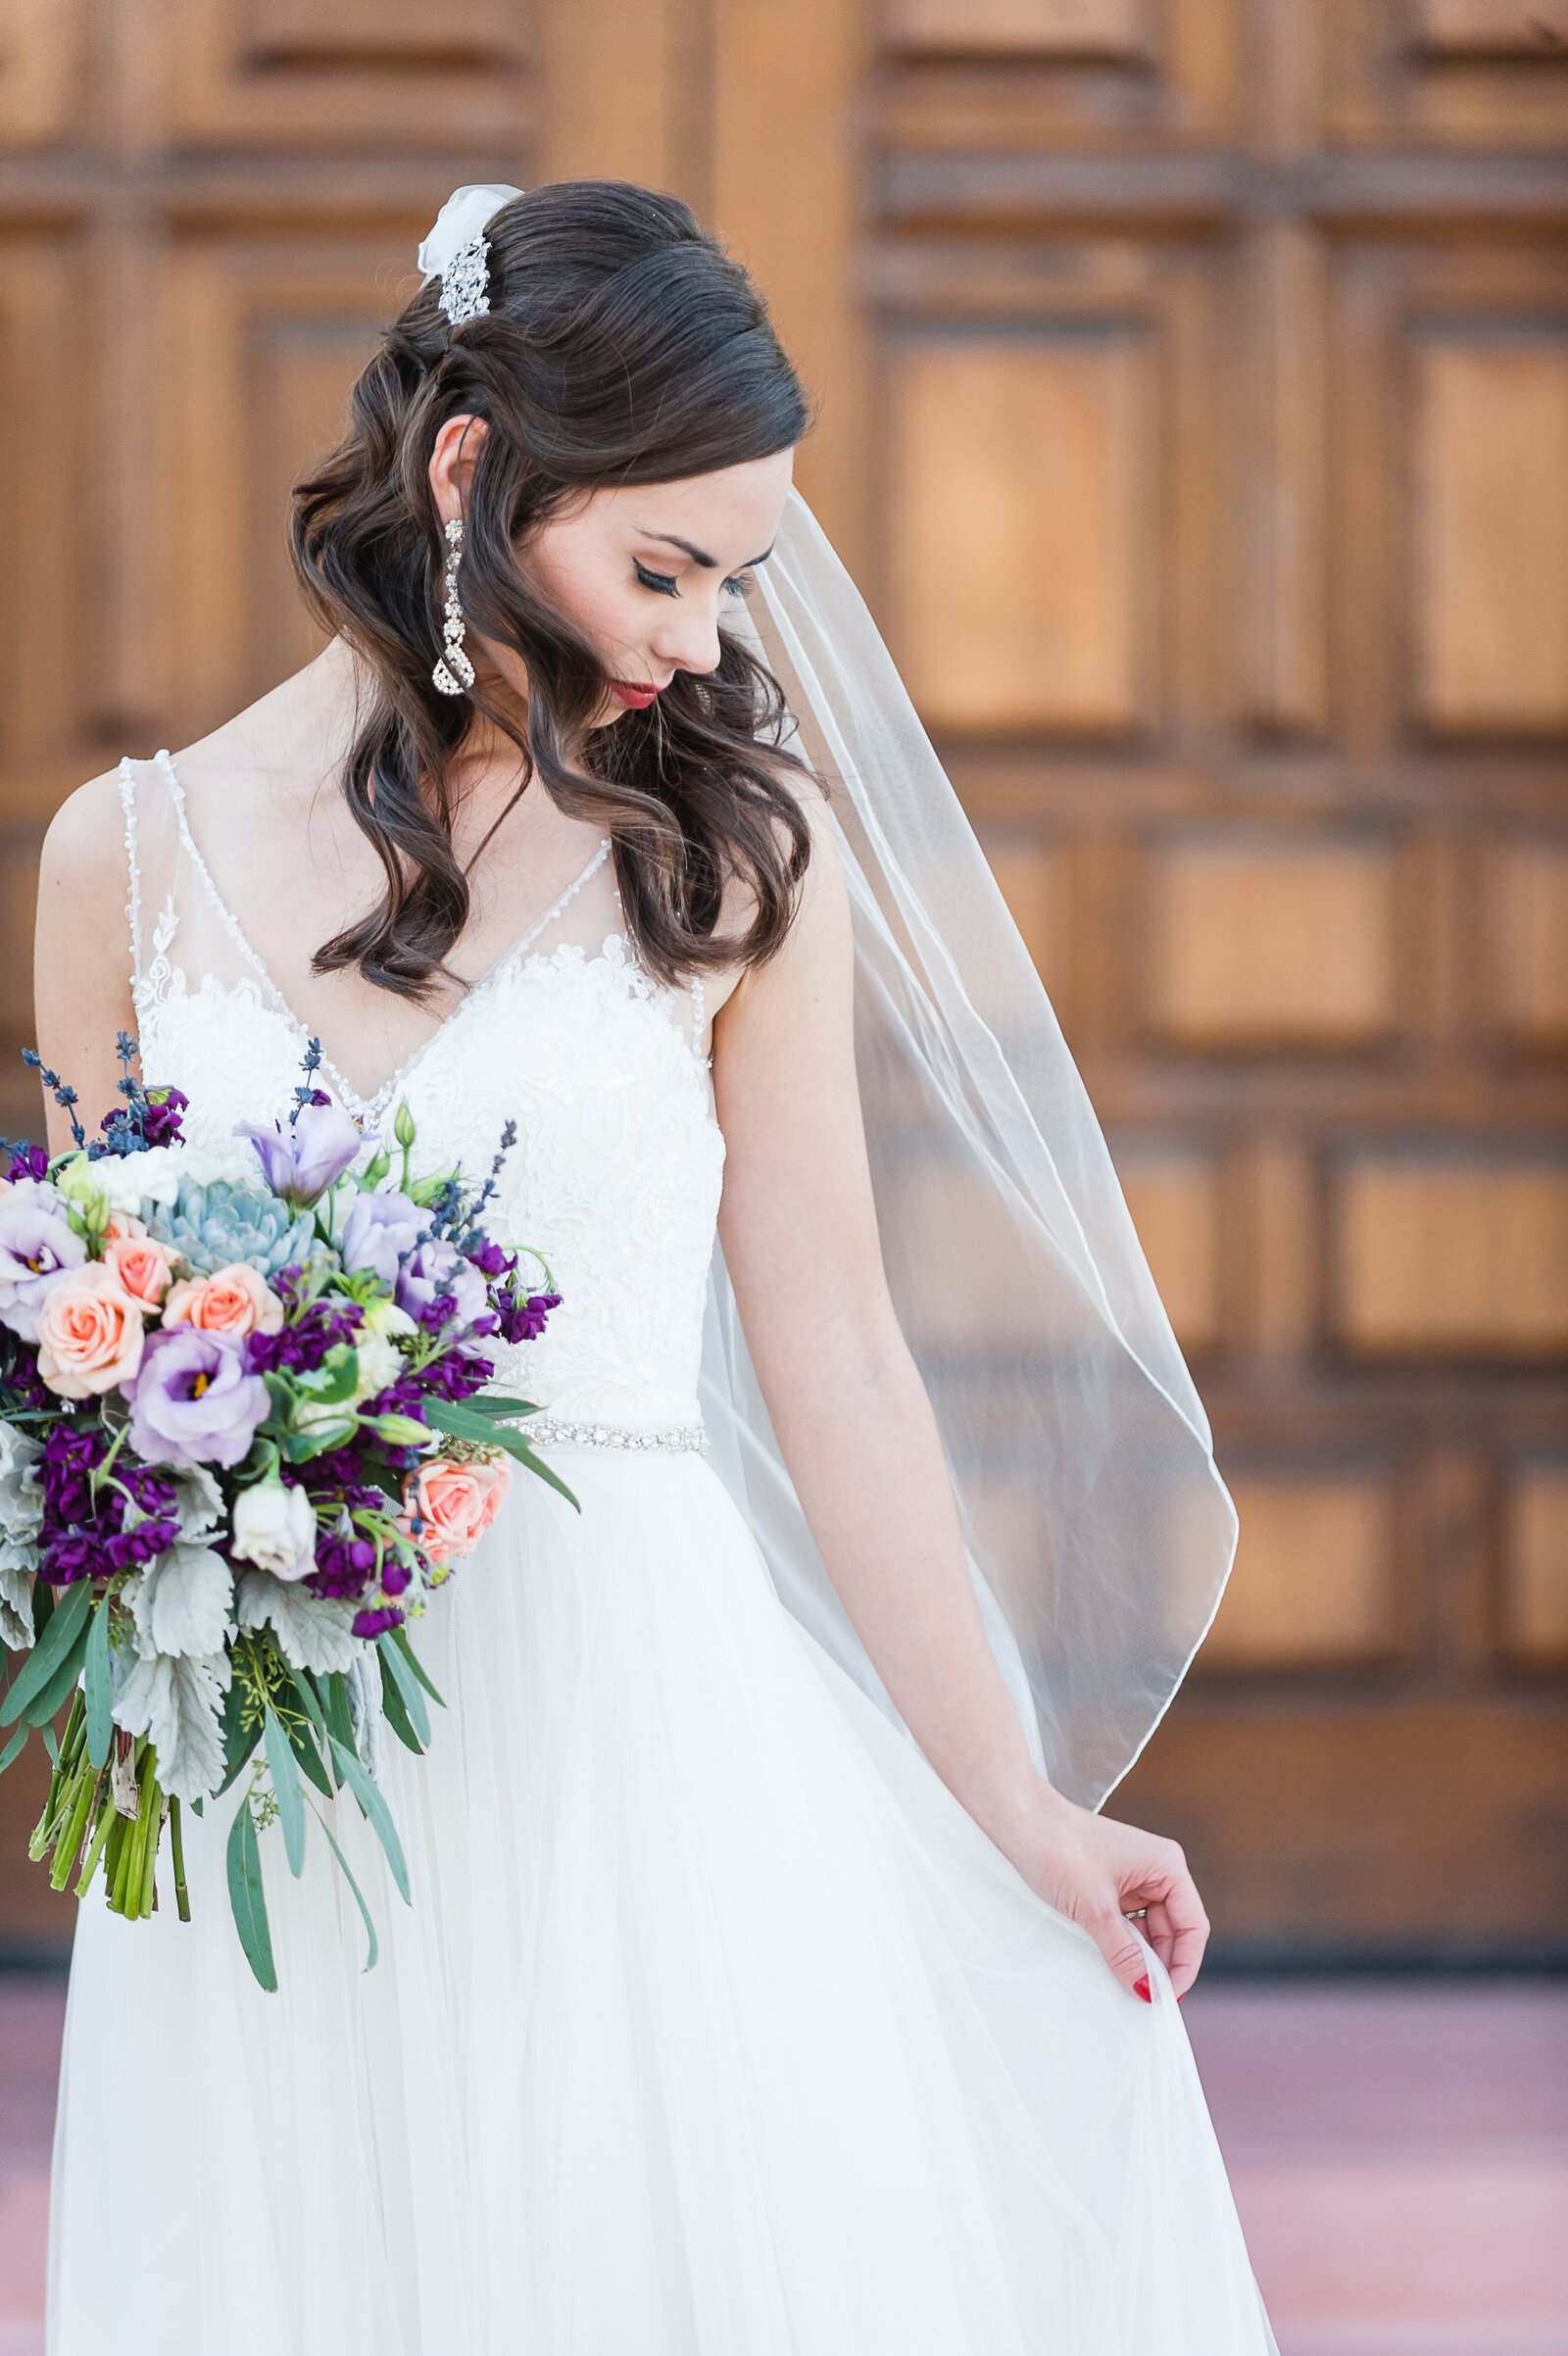 Bride outside the Wigwam holding her veil and bouquet of purple and peach flowers.